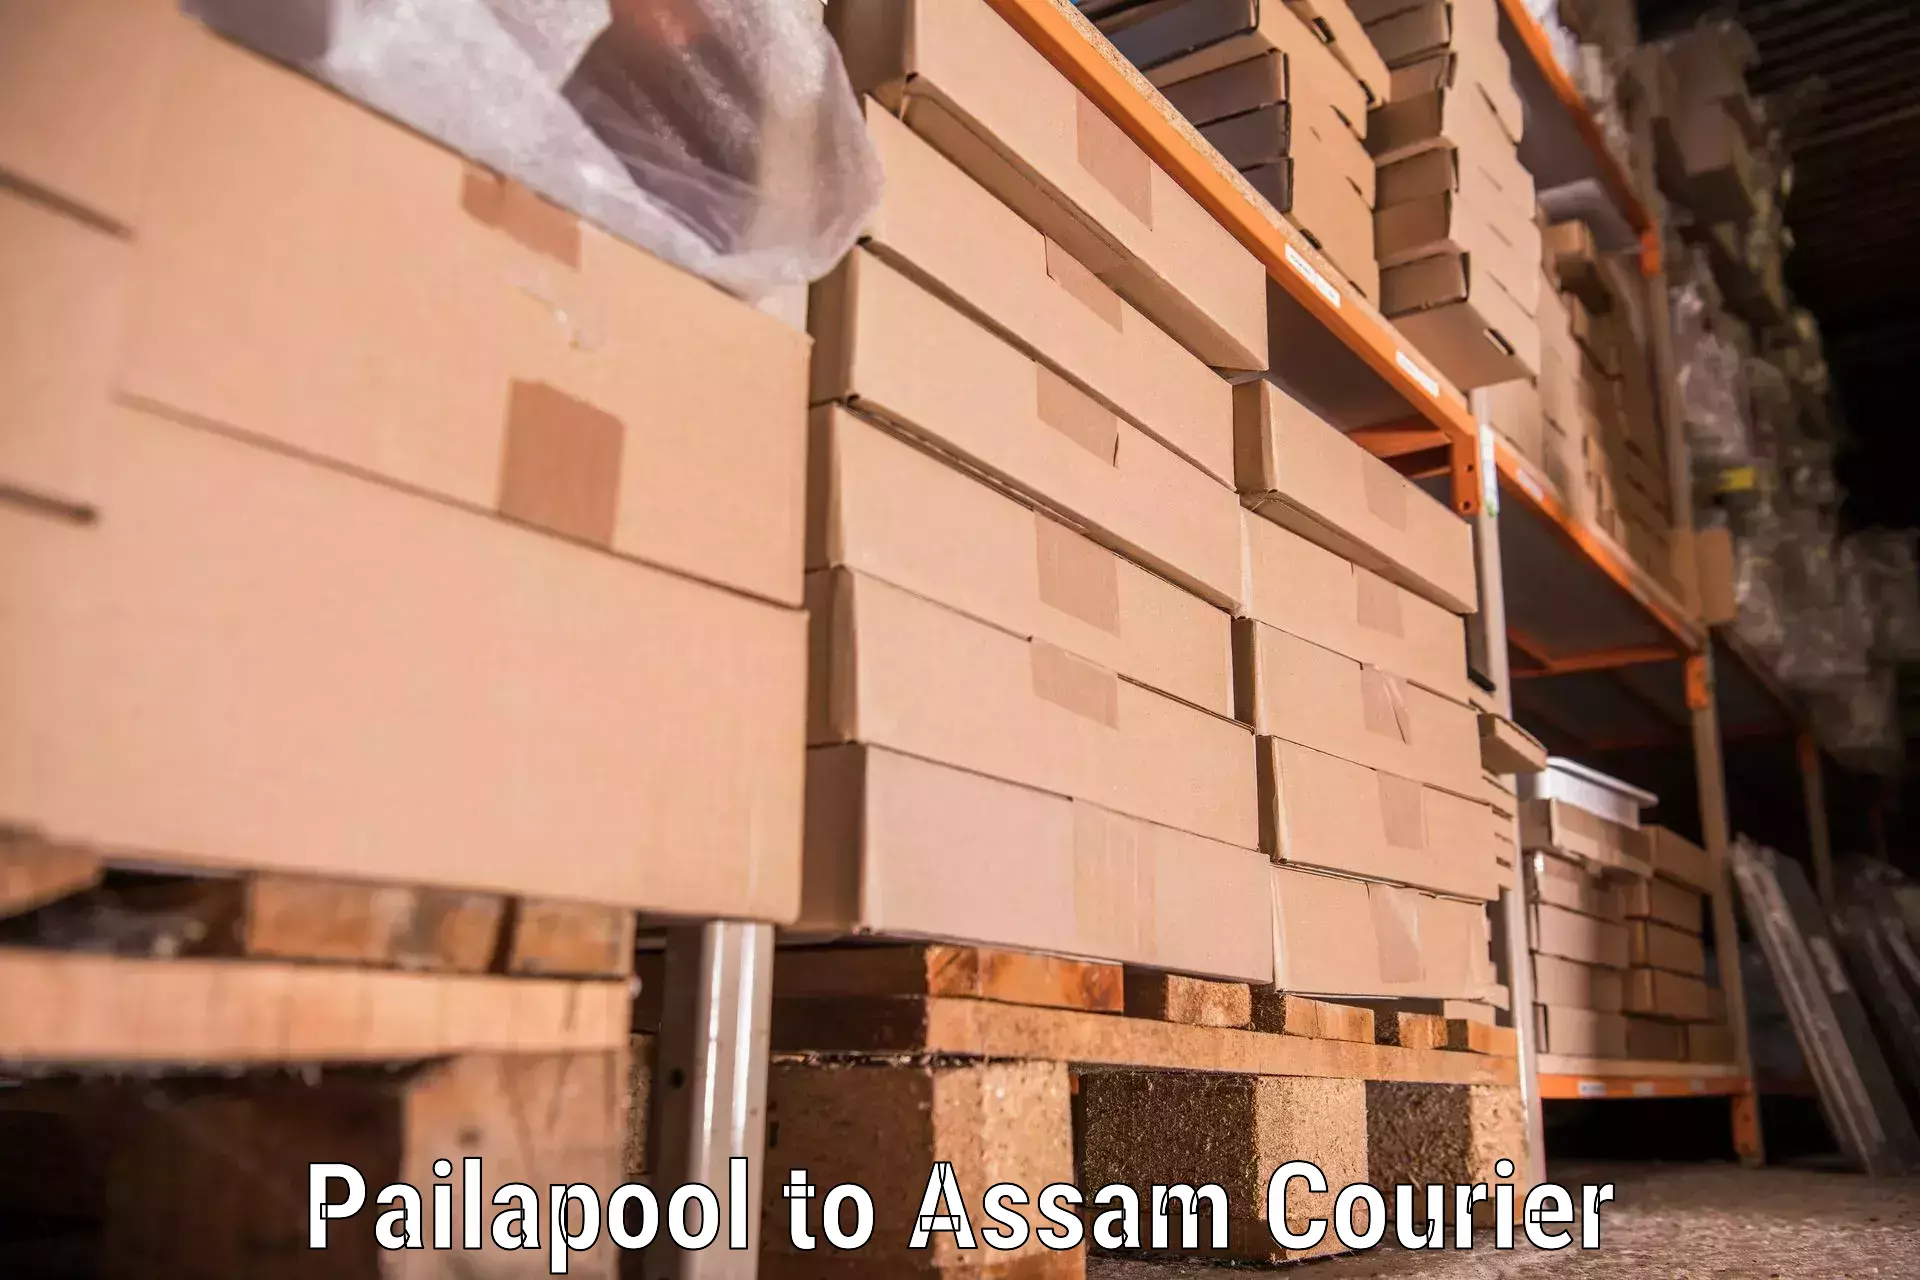 Furniture moving specialists Pailapool to Pailapool